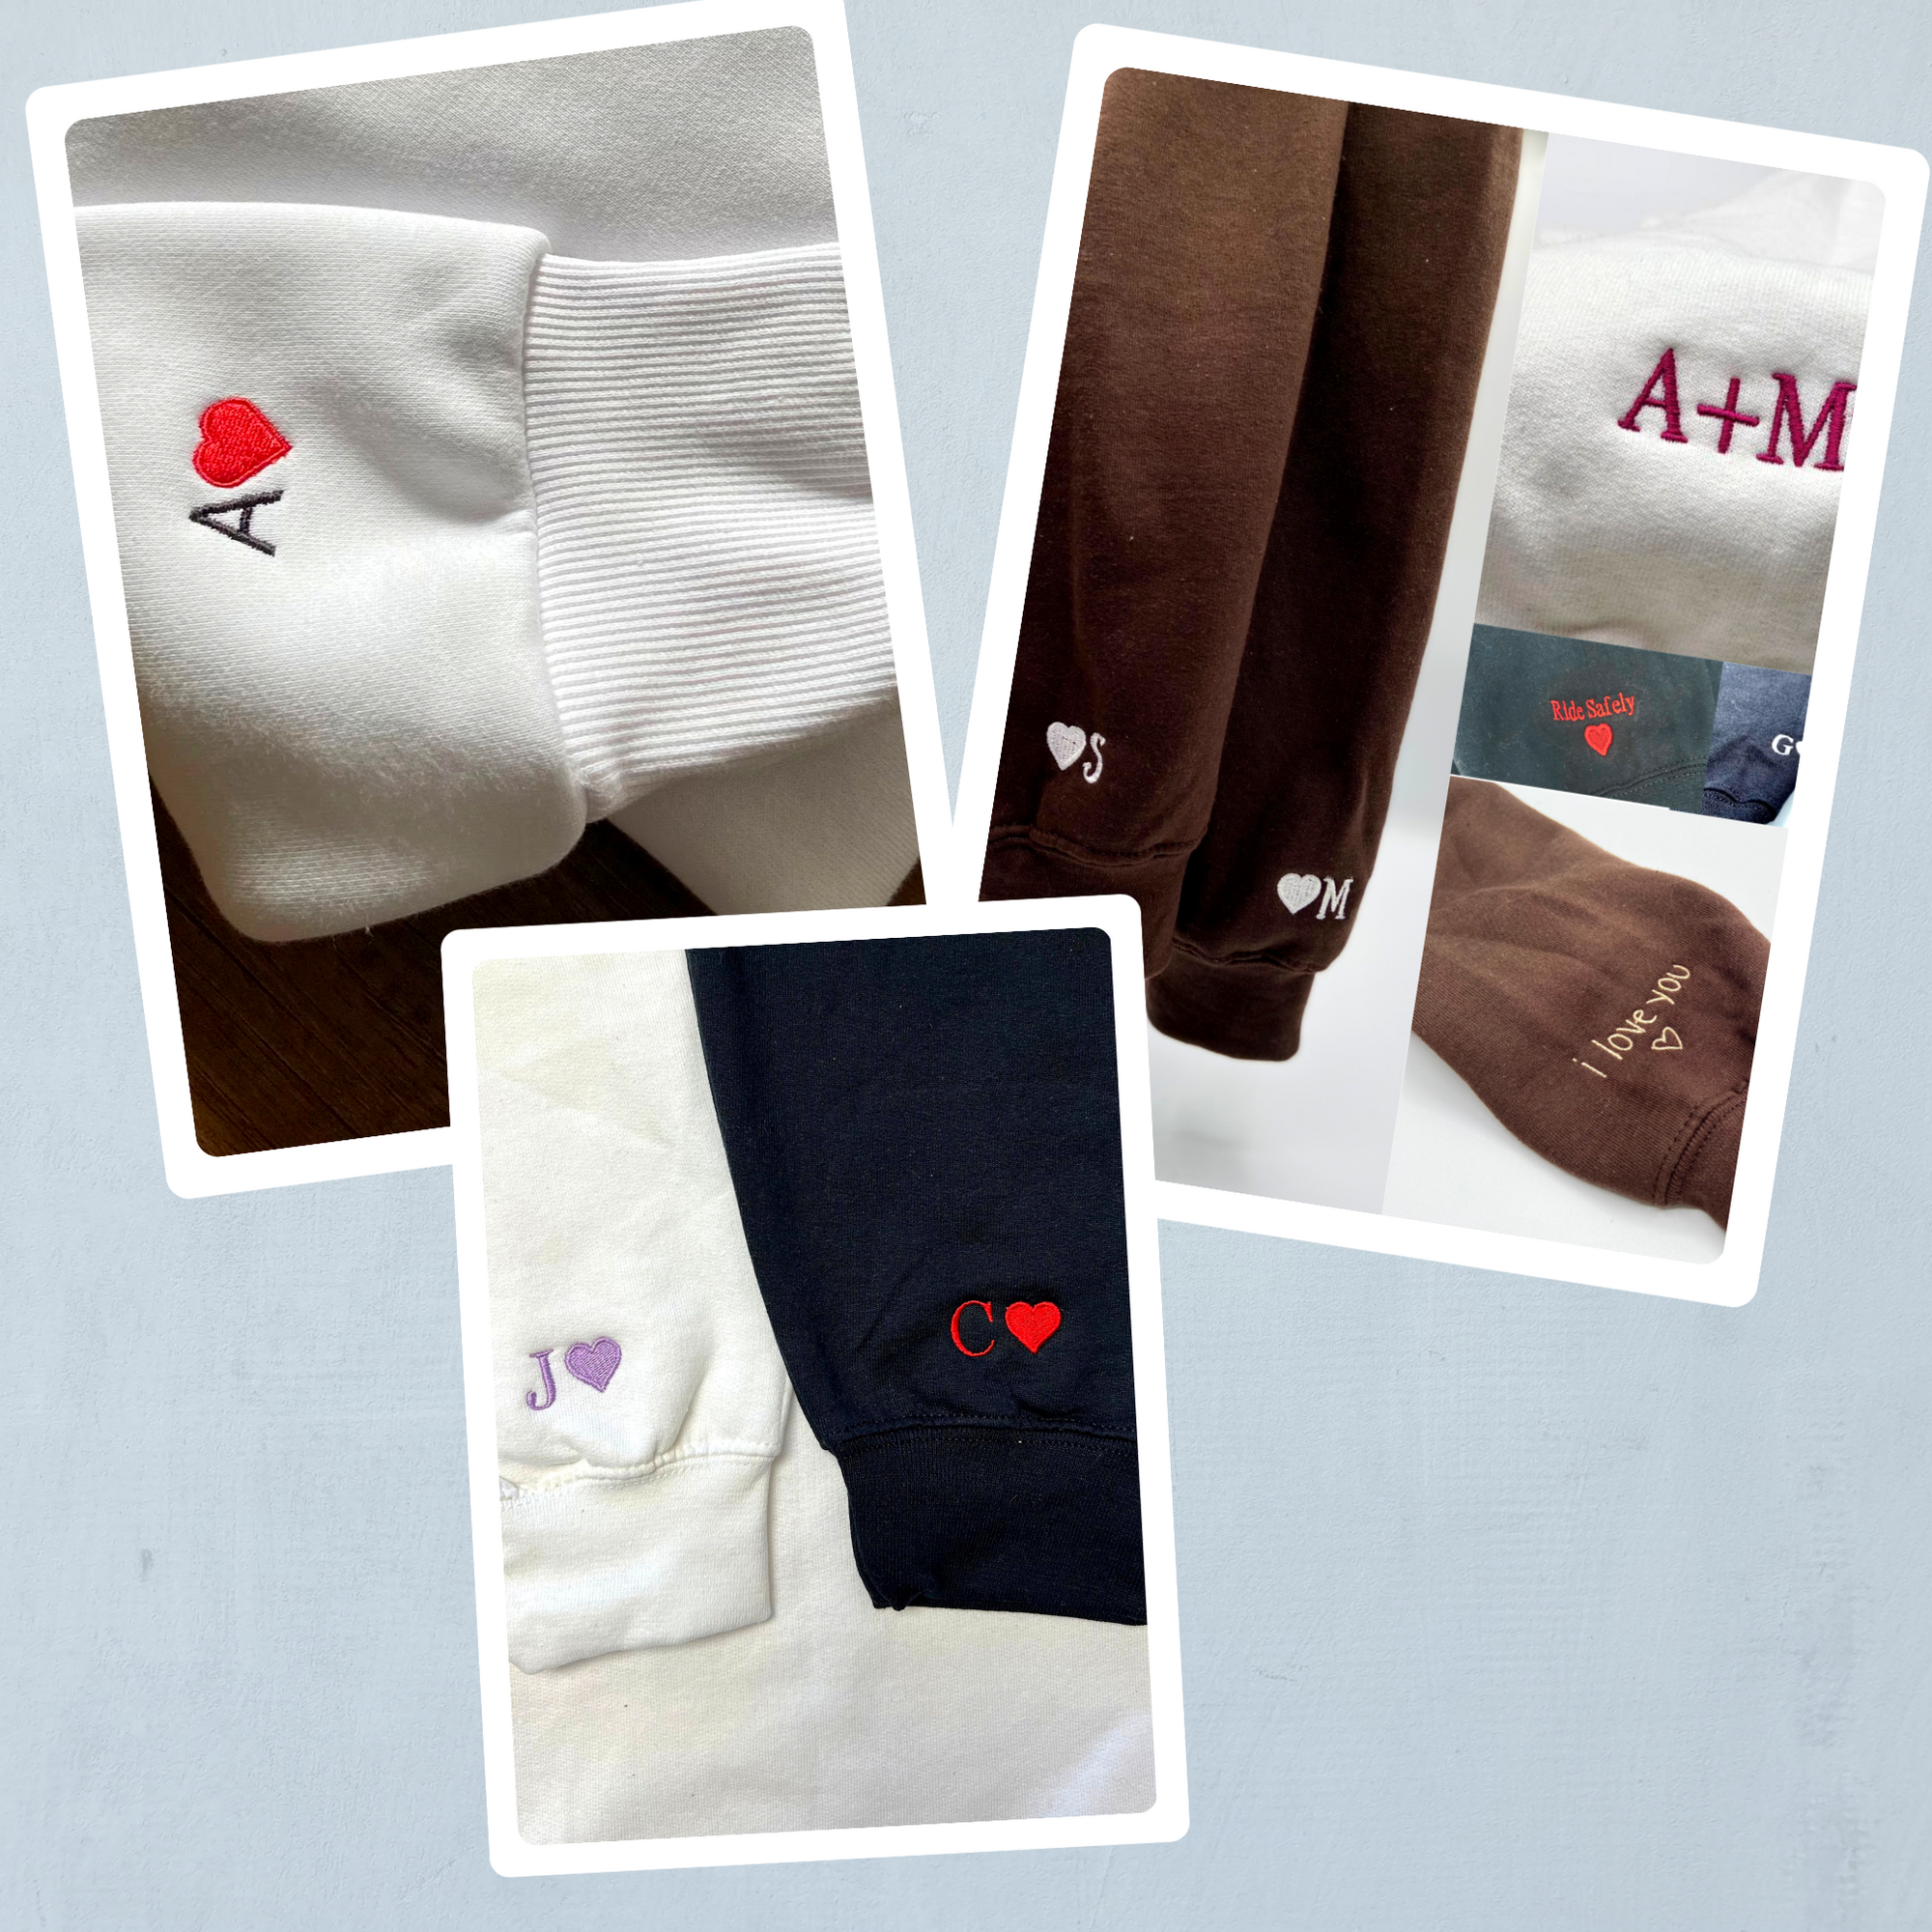 Custom Embroidered Sweatshirts For Couples, Custom Matching Couple Sweatshirt, Cute Couples Mouses Hearts Embroidered Crewneck Sweater